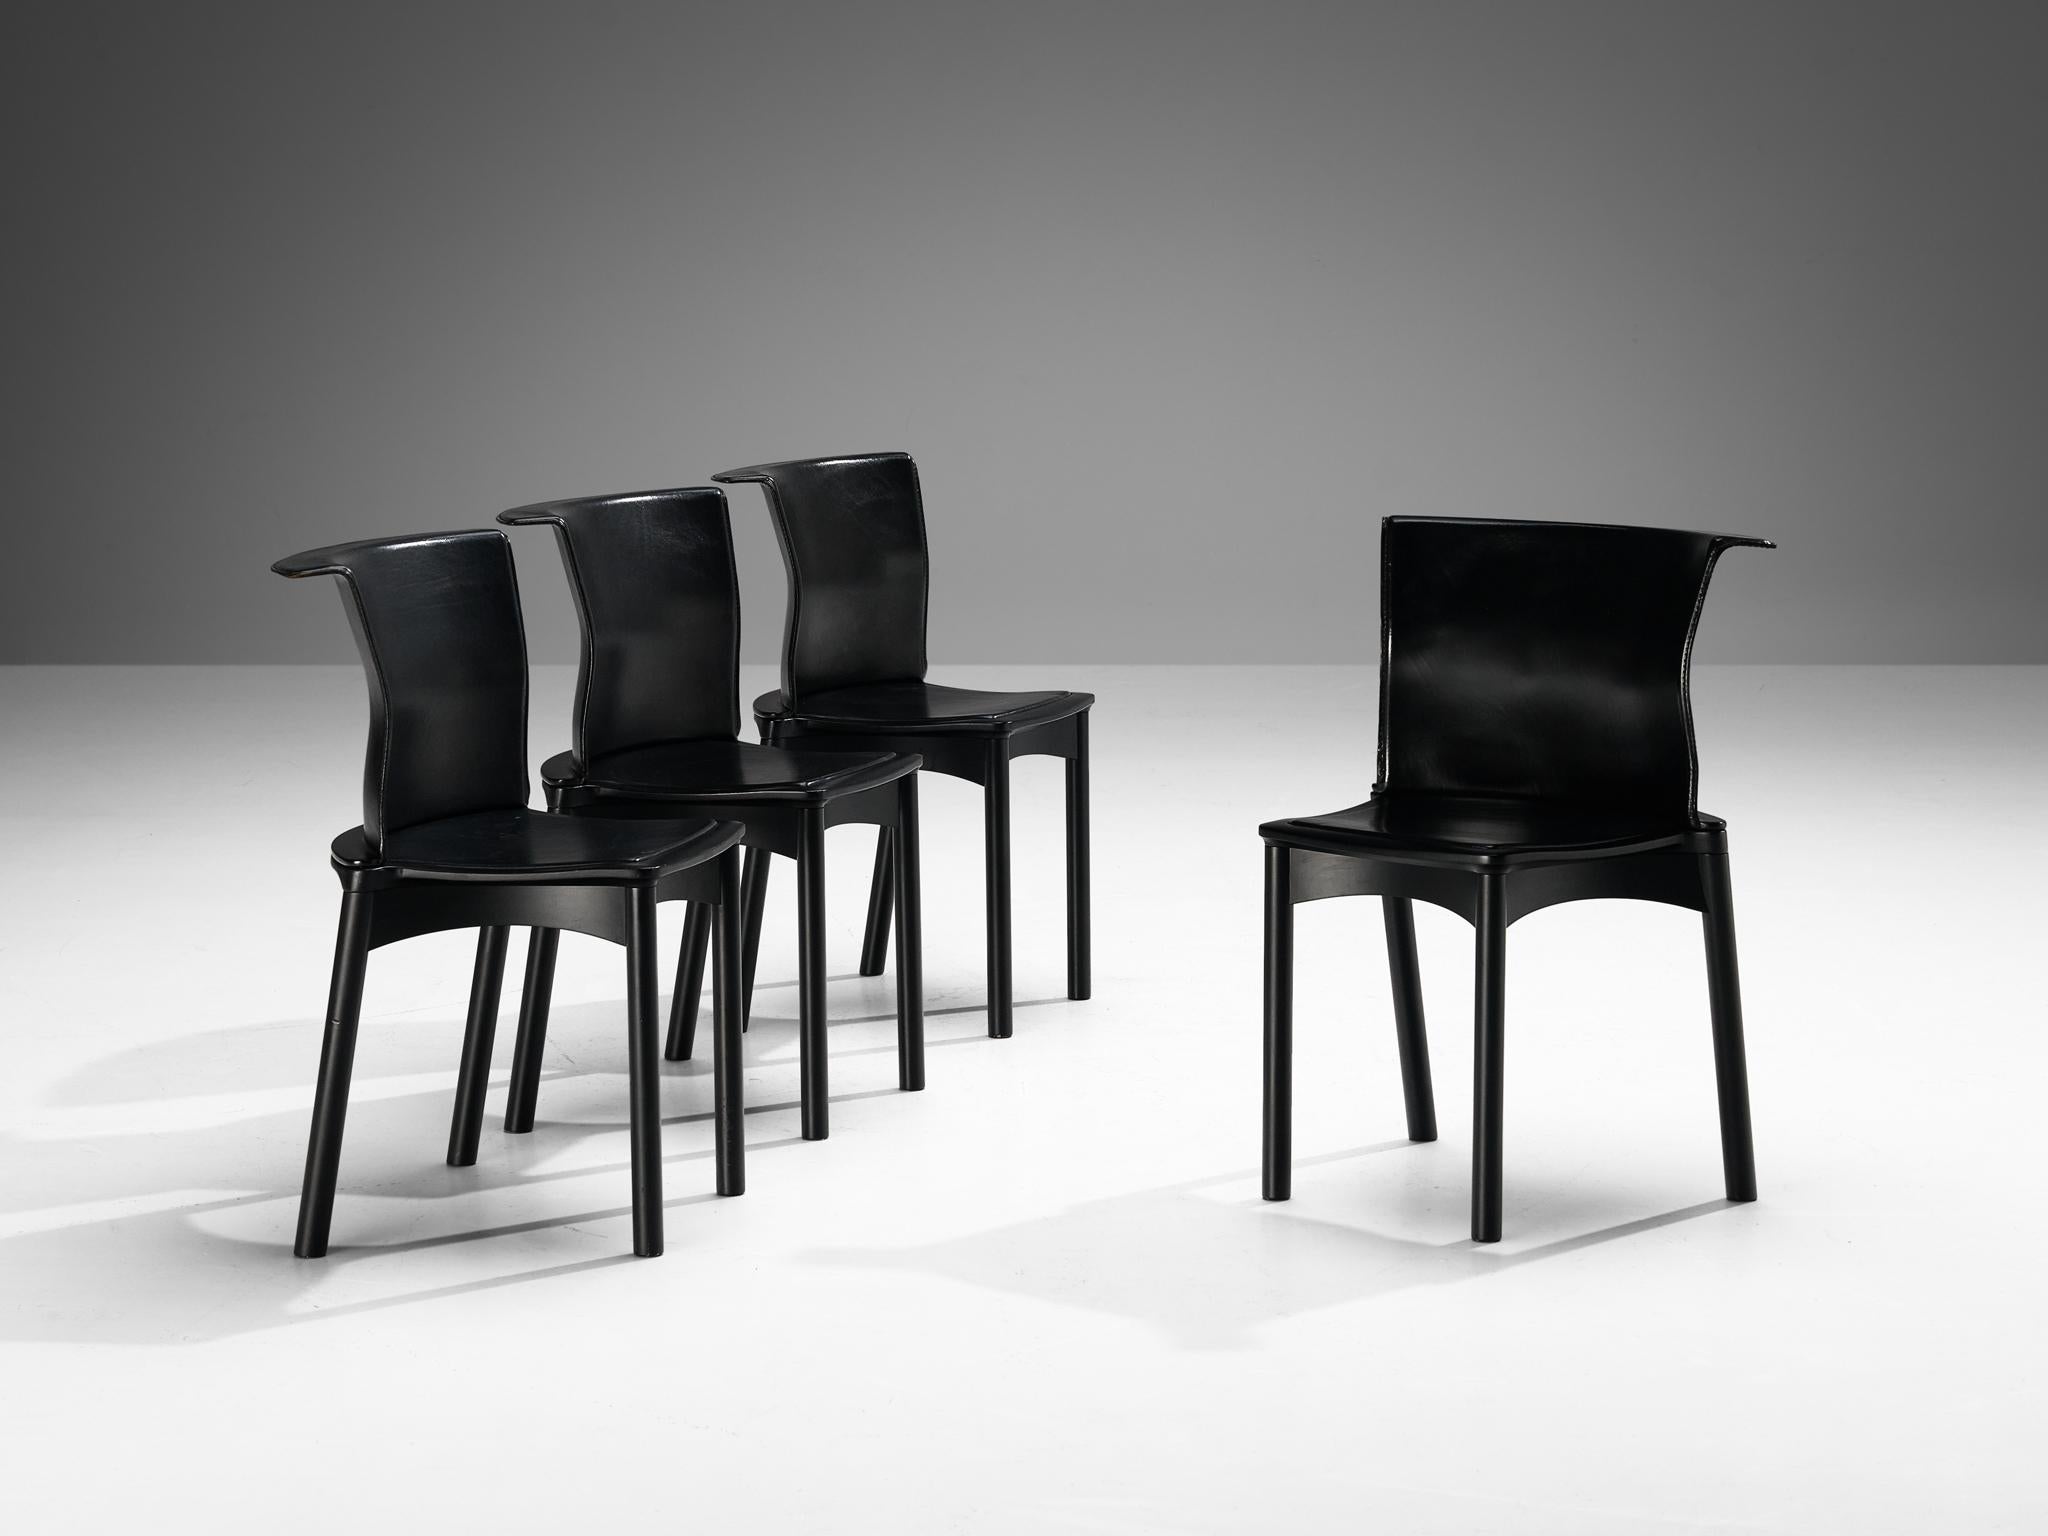 Francesco Binfaré for Cassina, set of four 'Hock' dining chairs, black lacquered wood, leather, Italy, 1990s

These rare chairs are designed by Francesco Binfaré who was director of the Centro Ricerche Cassina from 1969 to 1976. A distinct form